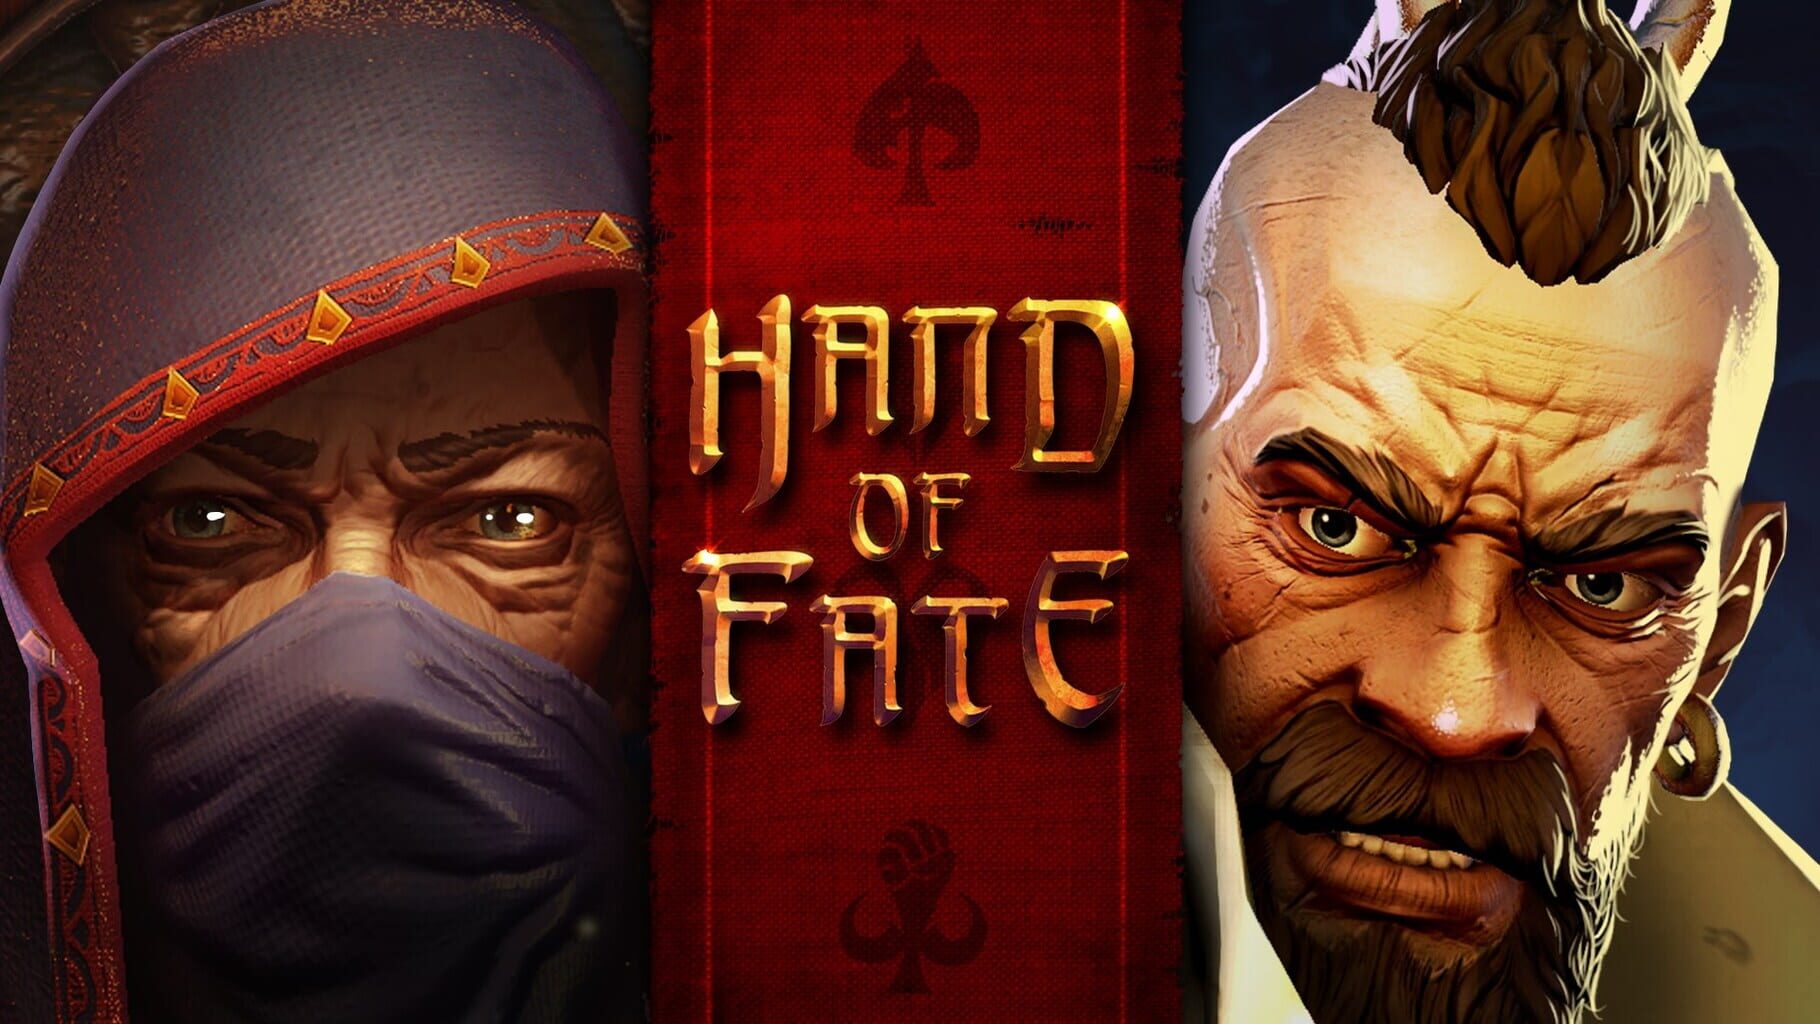 Artwork for Hand of Fate